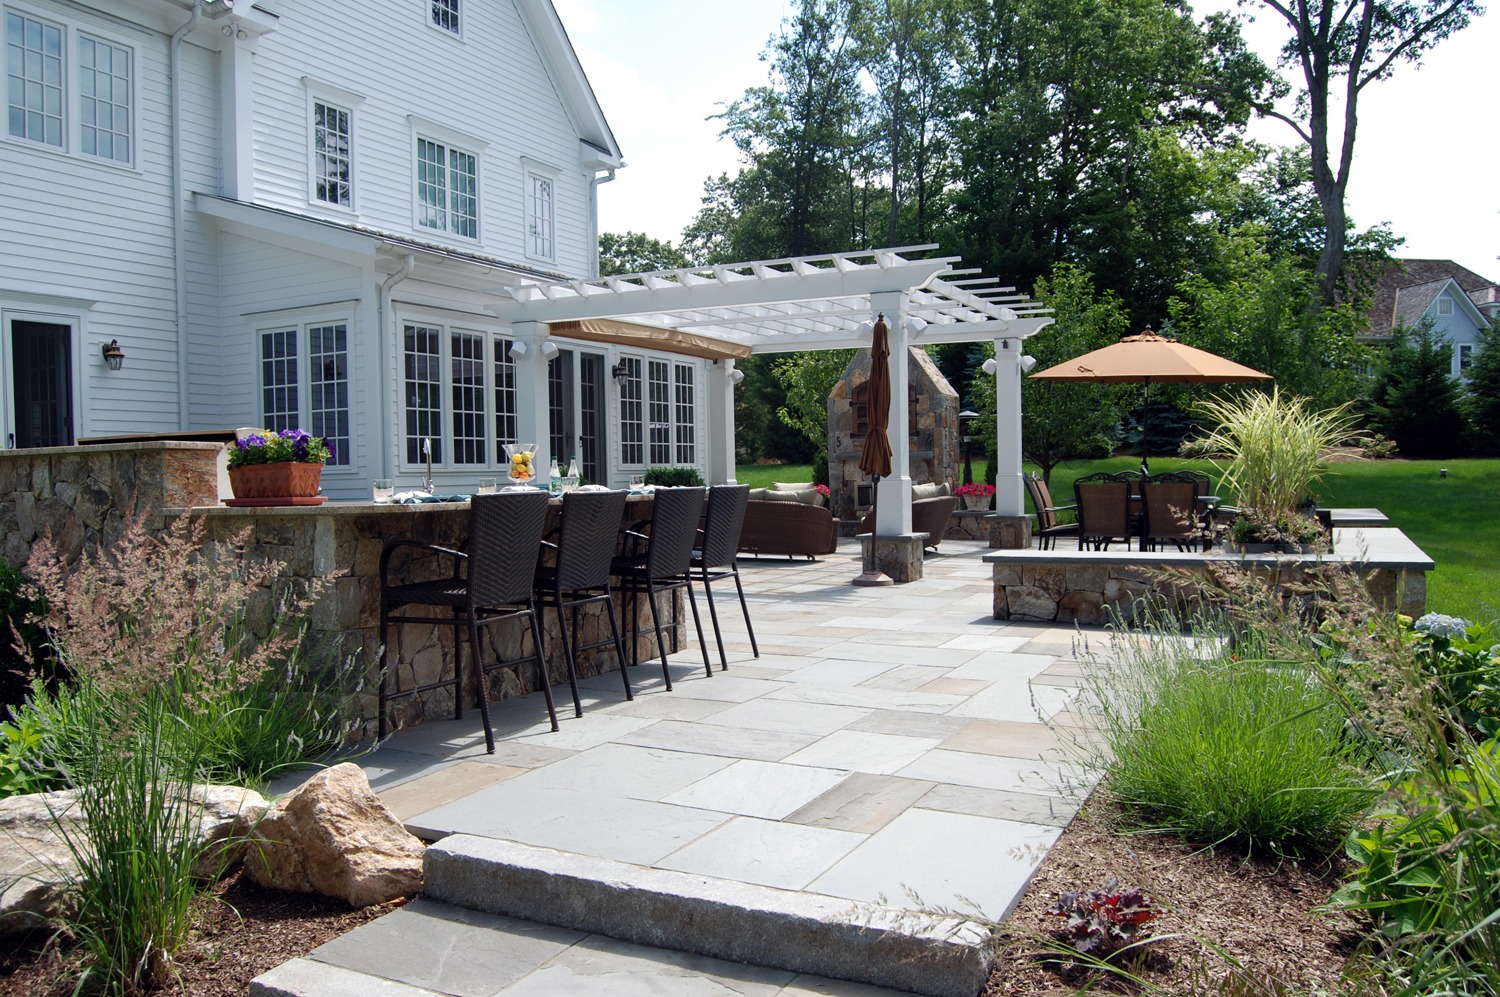 An elegant outdoor patio with a stone bar, seating area, pergola, and umbrella, adjacent to a white house with greenery and a clear sky.